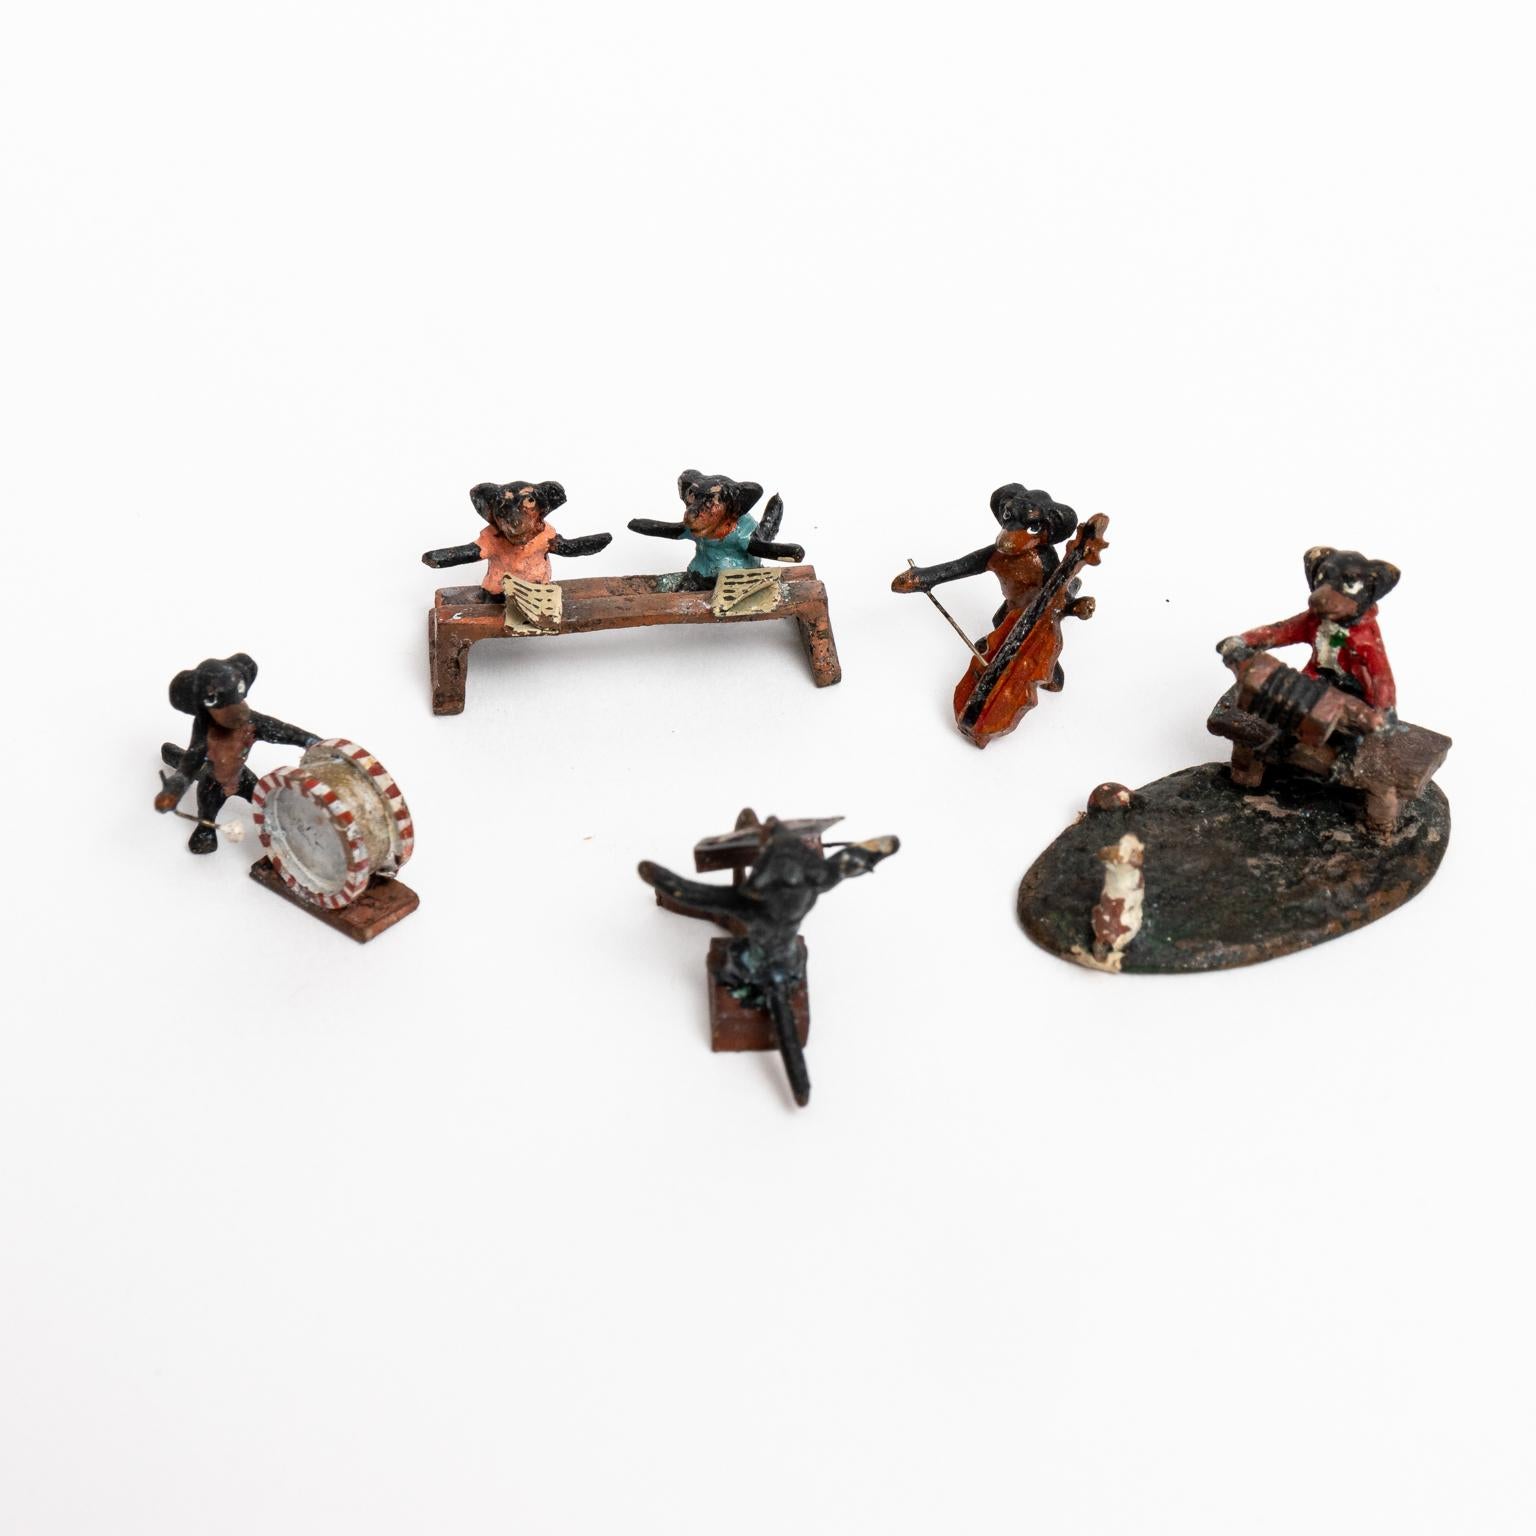 Five piece Austrian cold painted bronze miniature Dachshund band. The figurines include a drummer, cellist, conductor, two singers, and an accordion player. Please note of wear consistent with age. The figurines measure from 0.25 to 1.50 Inches